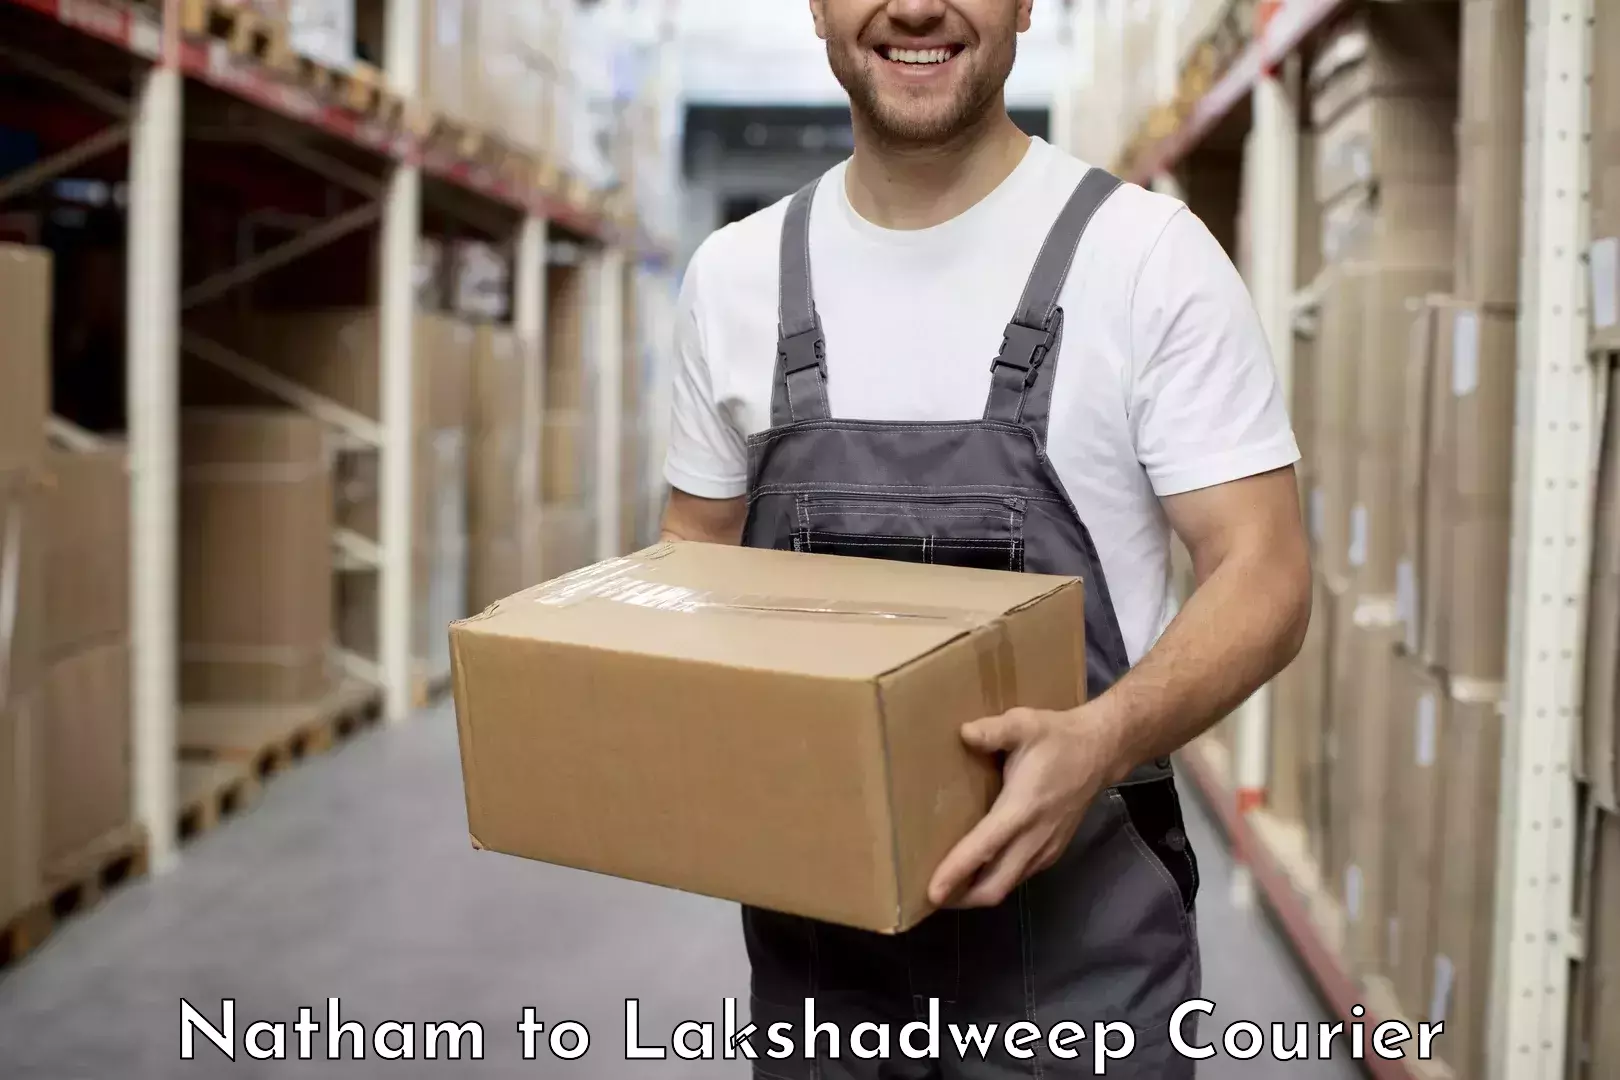 Professional courier handling Natham to Lakshadweep